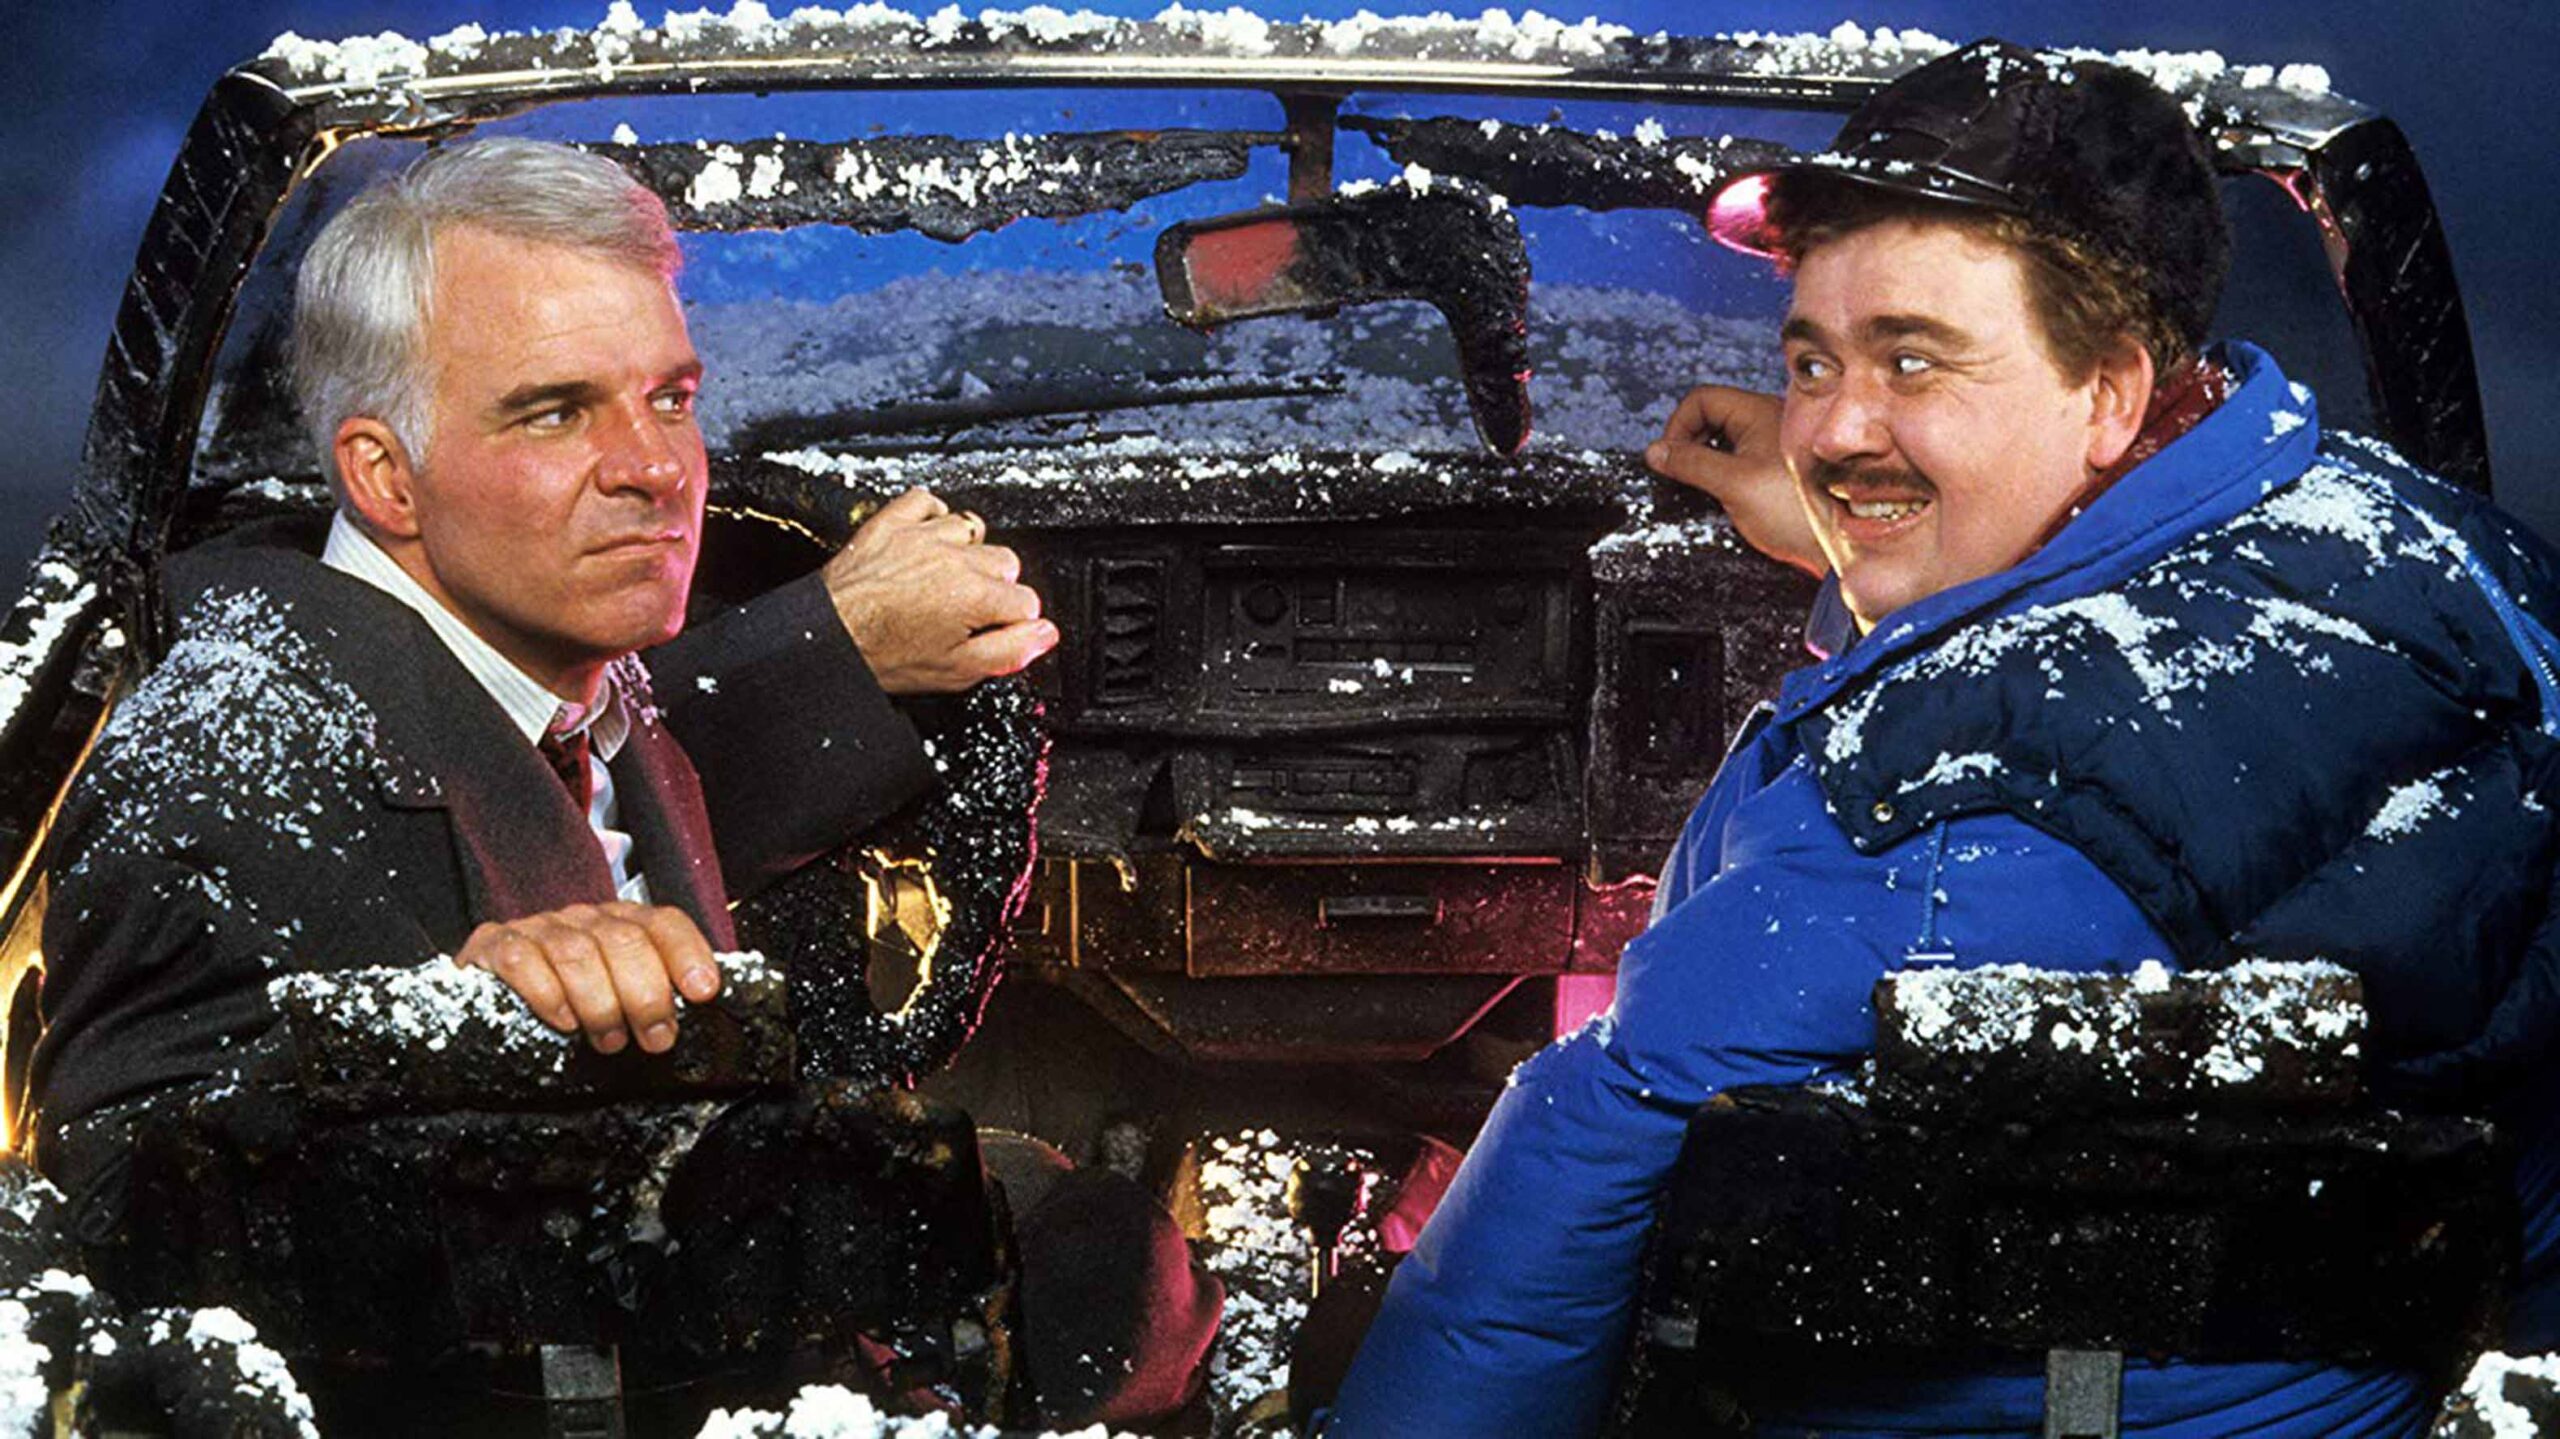 Planes, Trains and Automobiles Steve Martin and John Candy in car